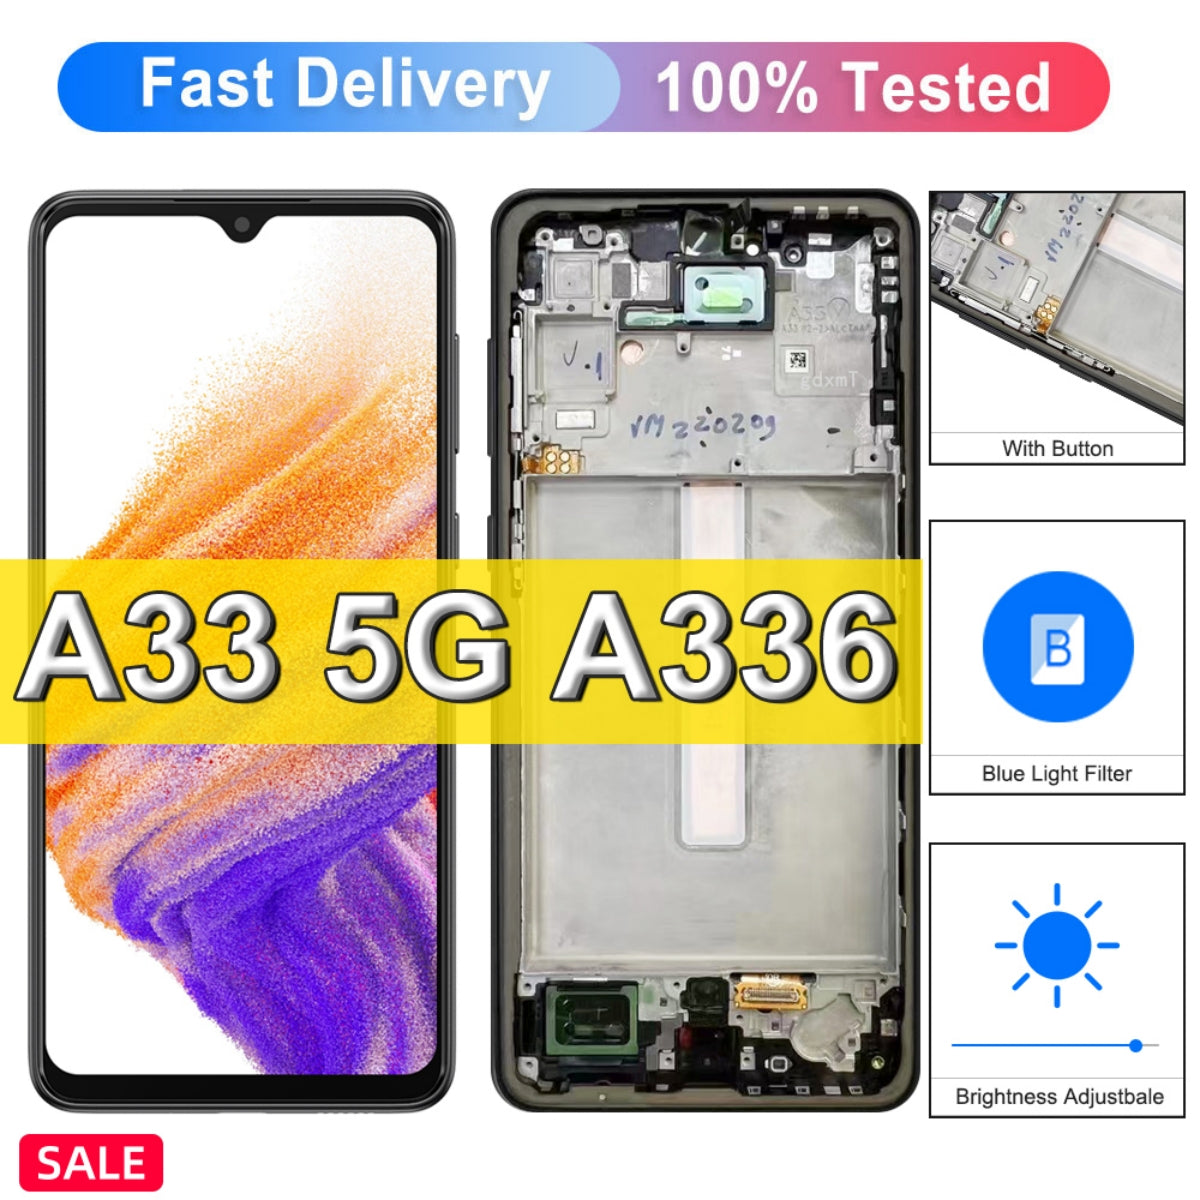 For Samsung Galaxy A33 5G SM-A336B LCD Display Touch Screen Digitizer  Replace